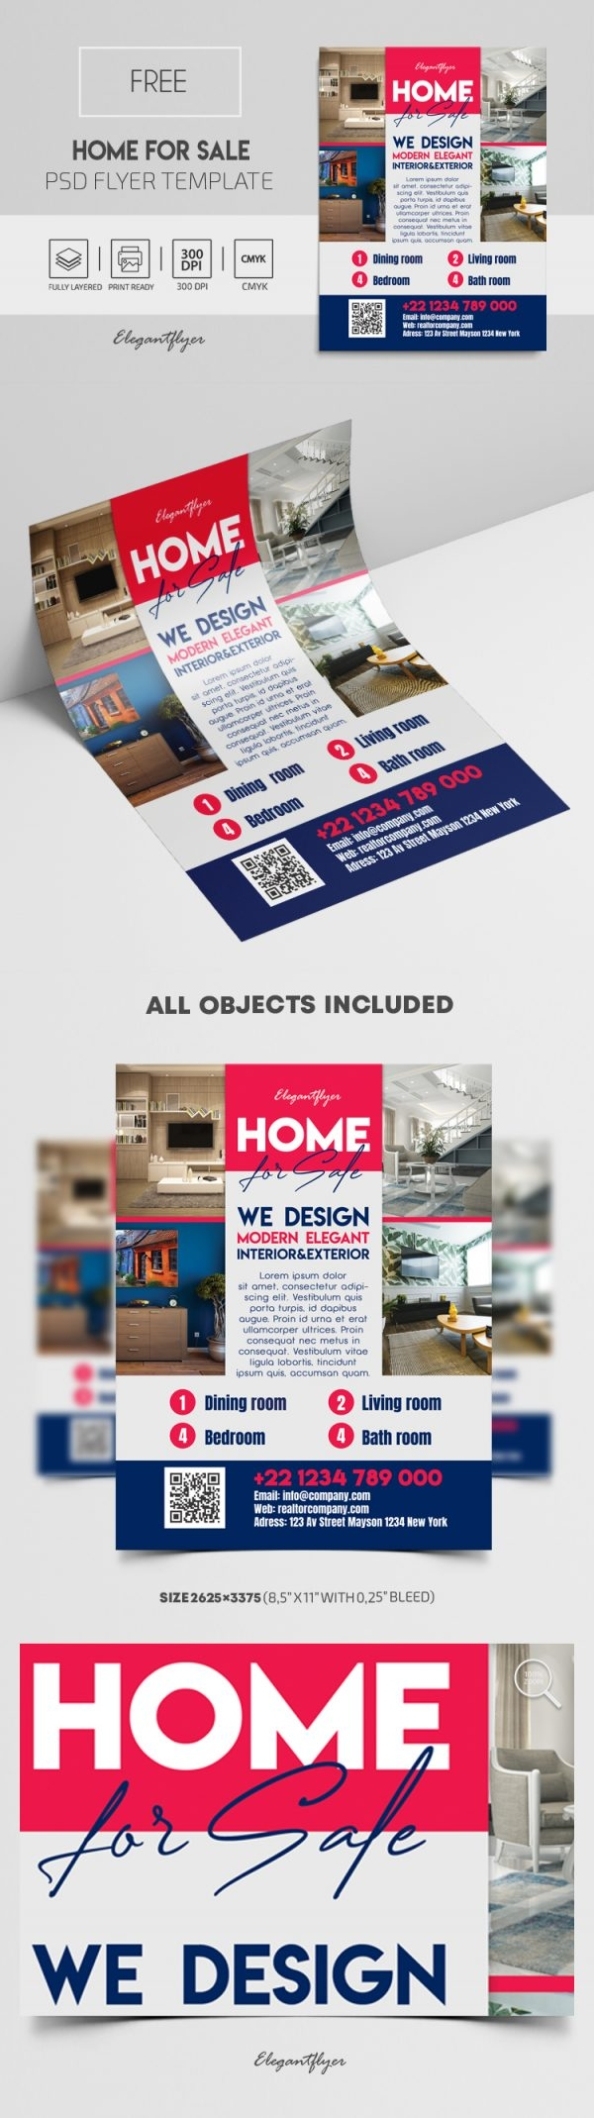 Home For Sale – Free Psd Flyer Template – By Elegantflyer Intended For Free Home For Sale Flyer Template